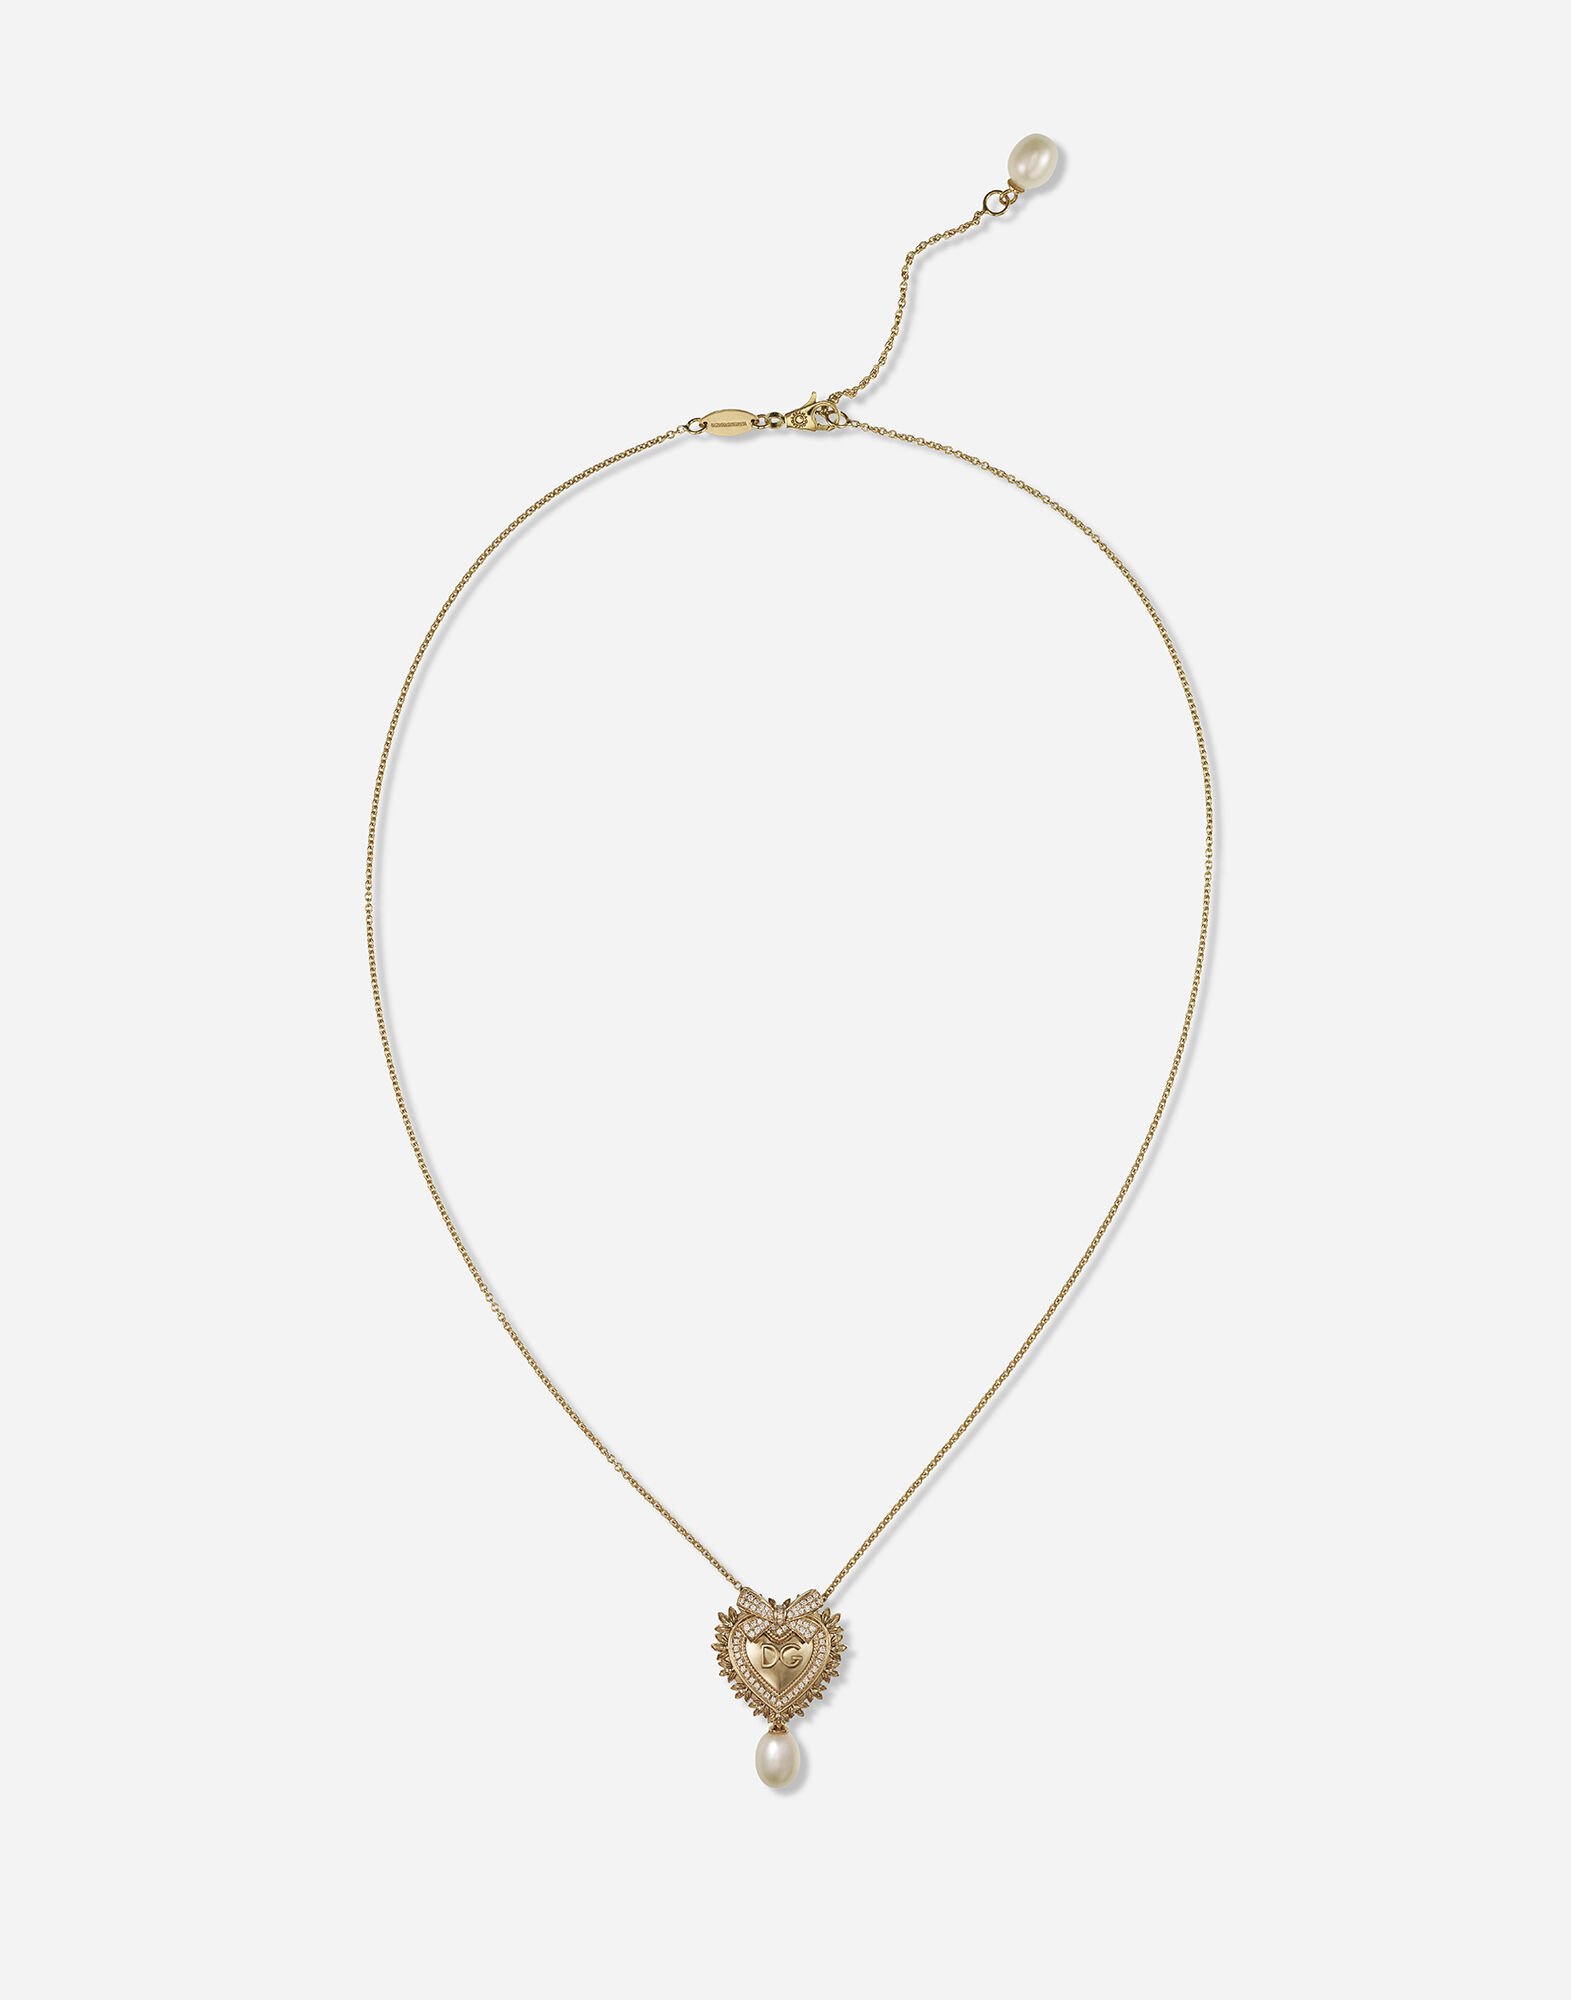 Dolce & Gabbana Devotion necklace in yellow gold with diamonds and pearls Gold BB7287AY828